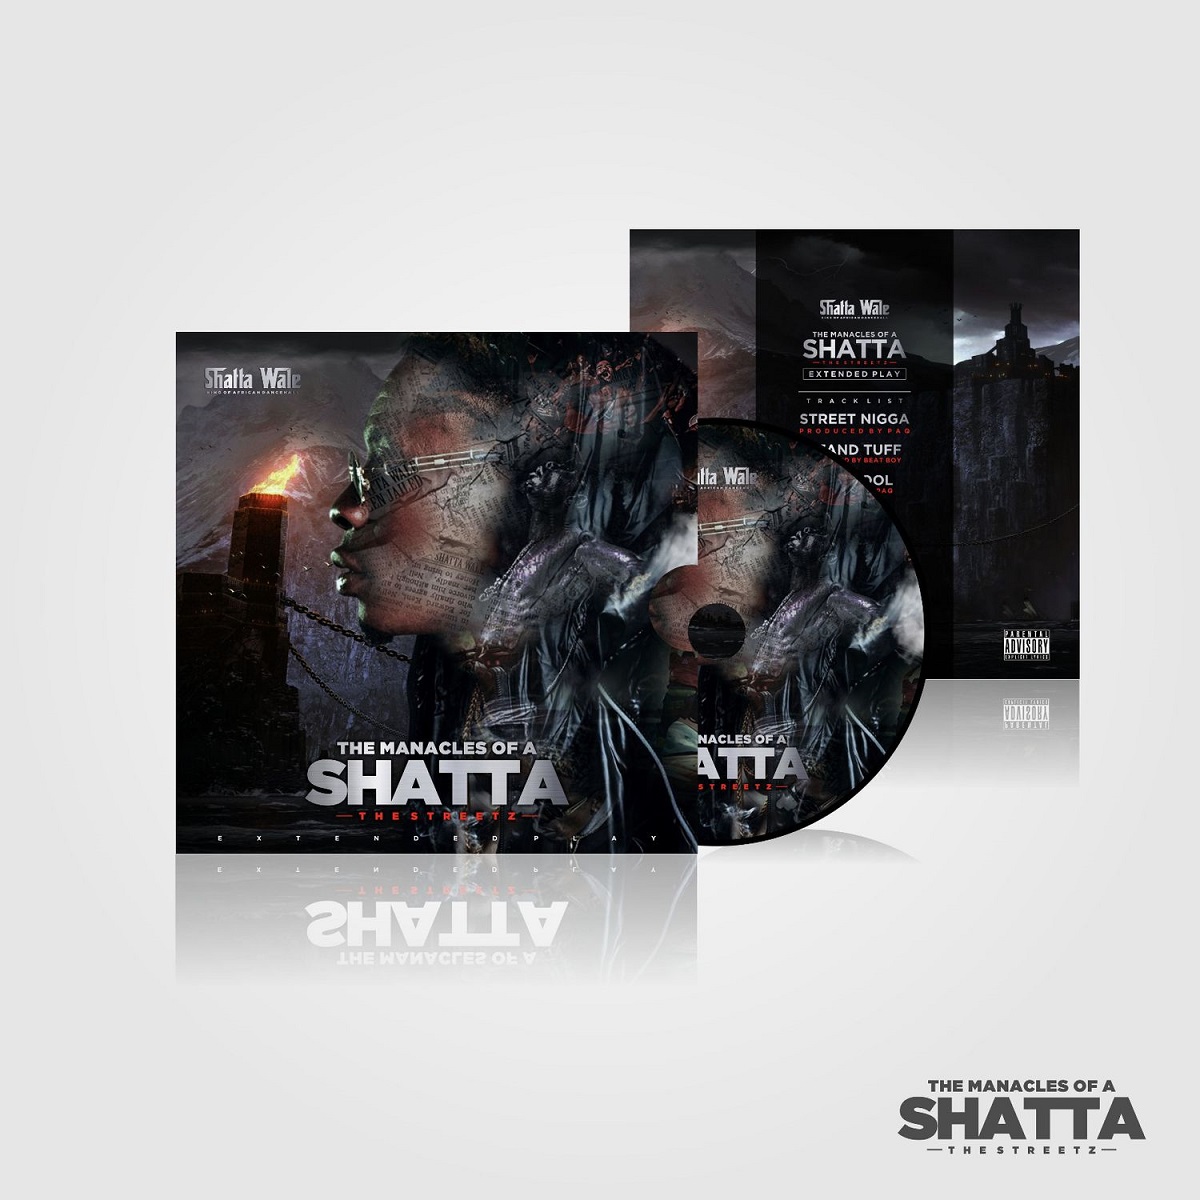 The Manacles Of A Shatta by Shatta Wale